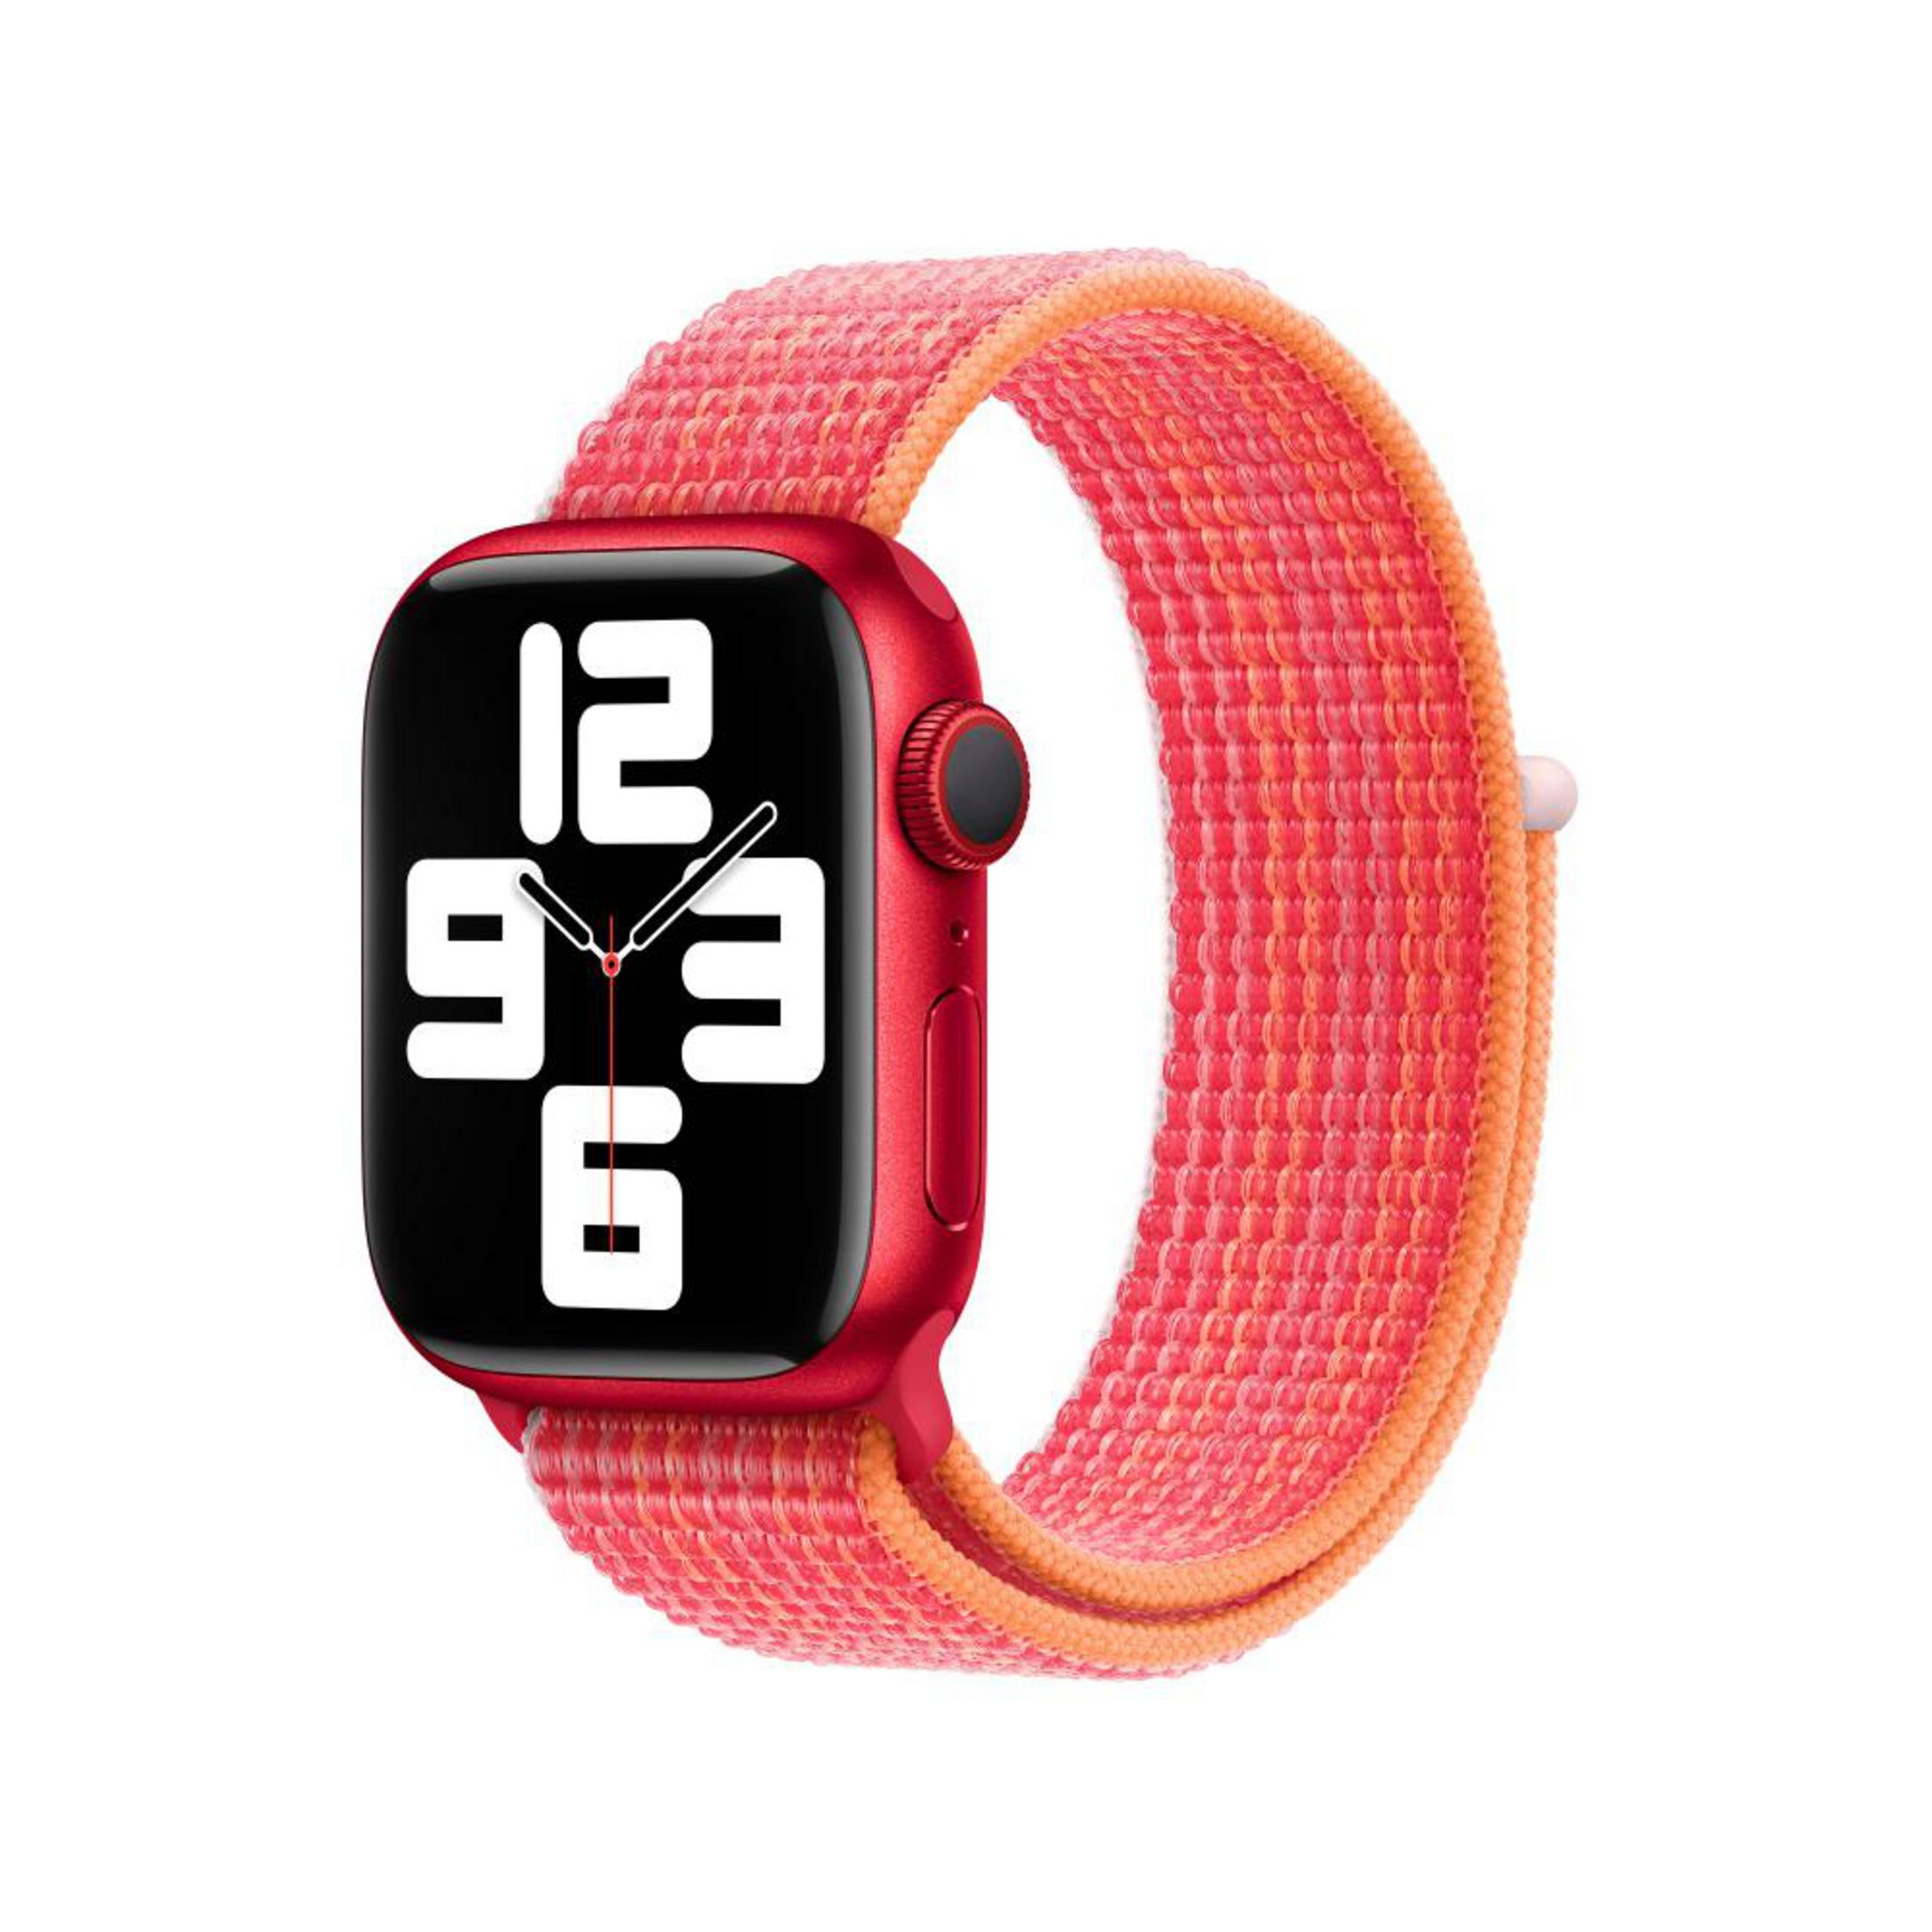 APPLE MPL83ZM/A 41MM 41 Product-Red SPORT 38 Ersatzarmband, Watch Apple, 40 mm, mm, mm, RED LOOP, Modelle